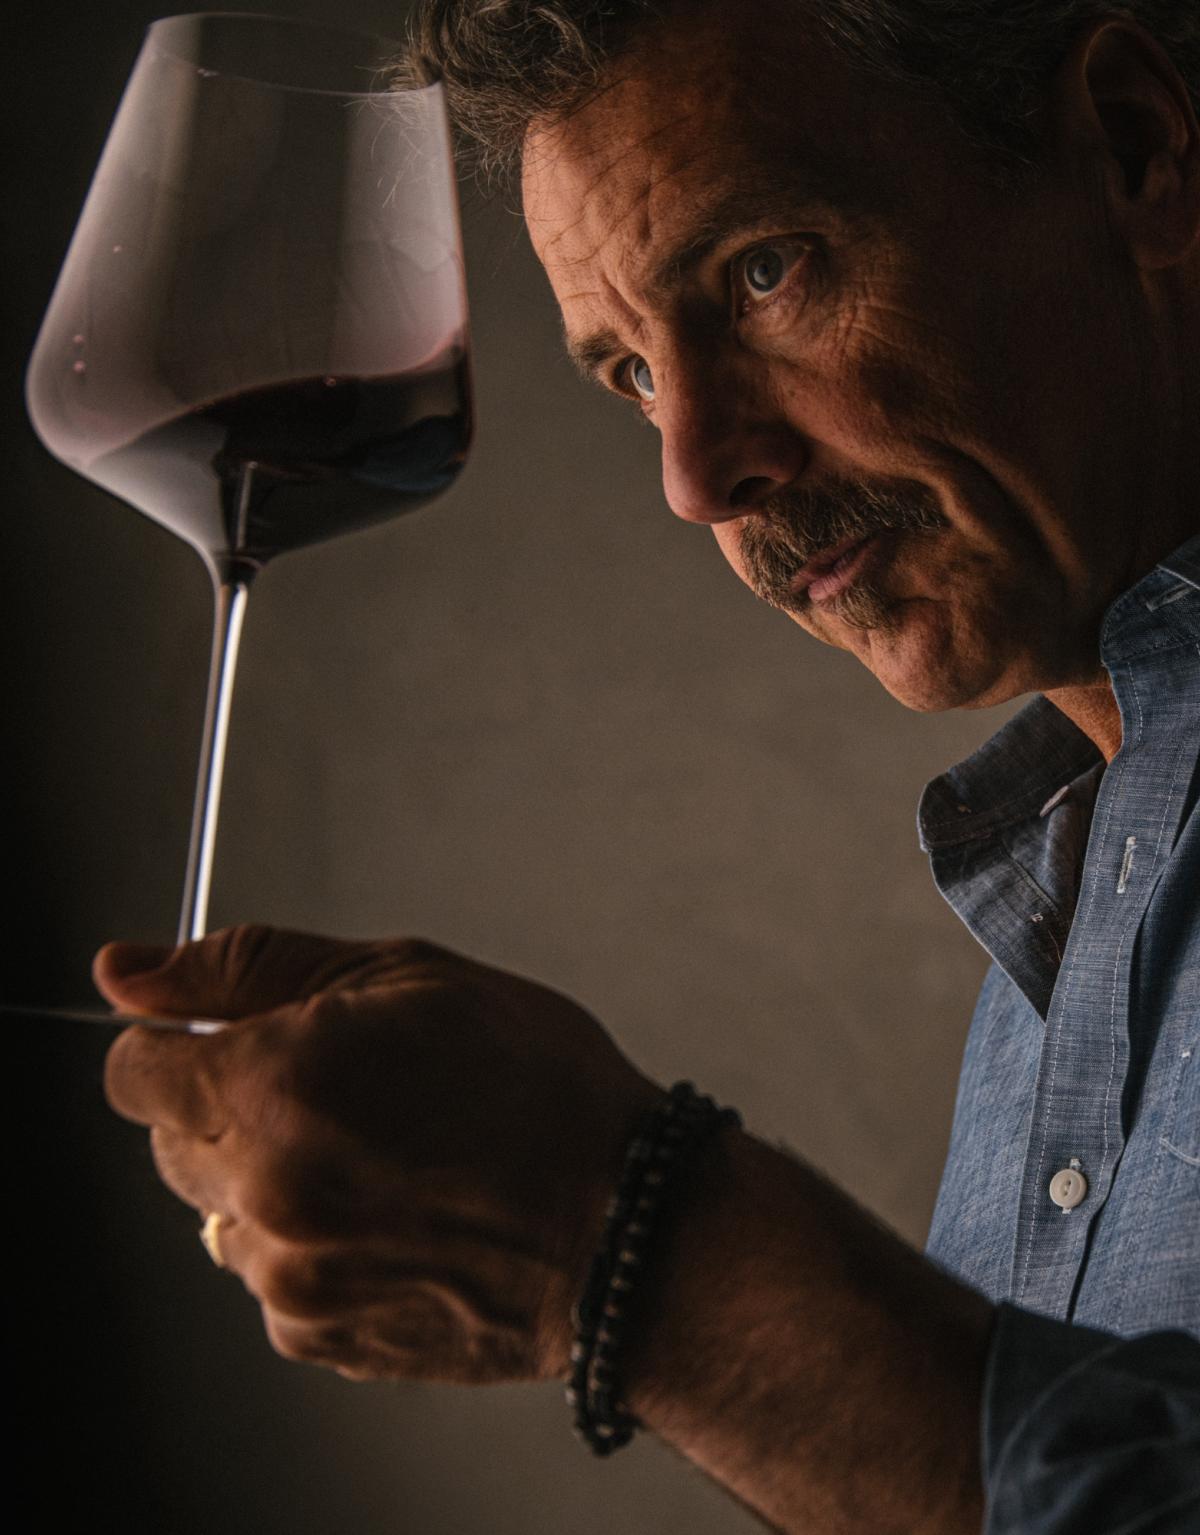 Winemaker Chris Carpenter looking closely at wine glass filled with Caladan wine.